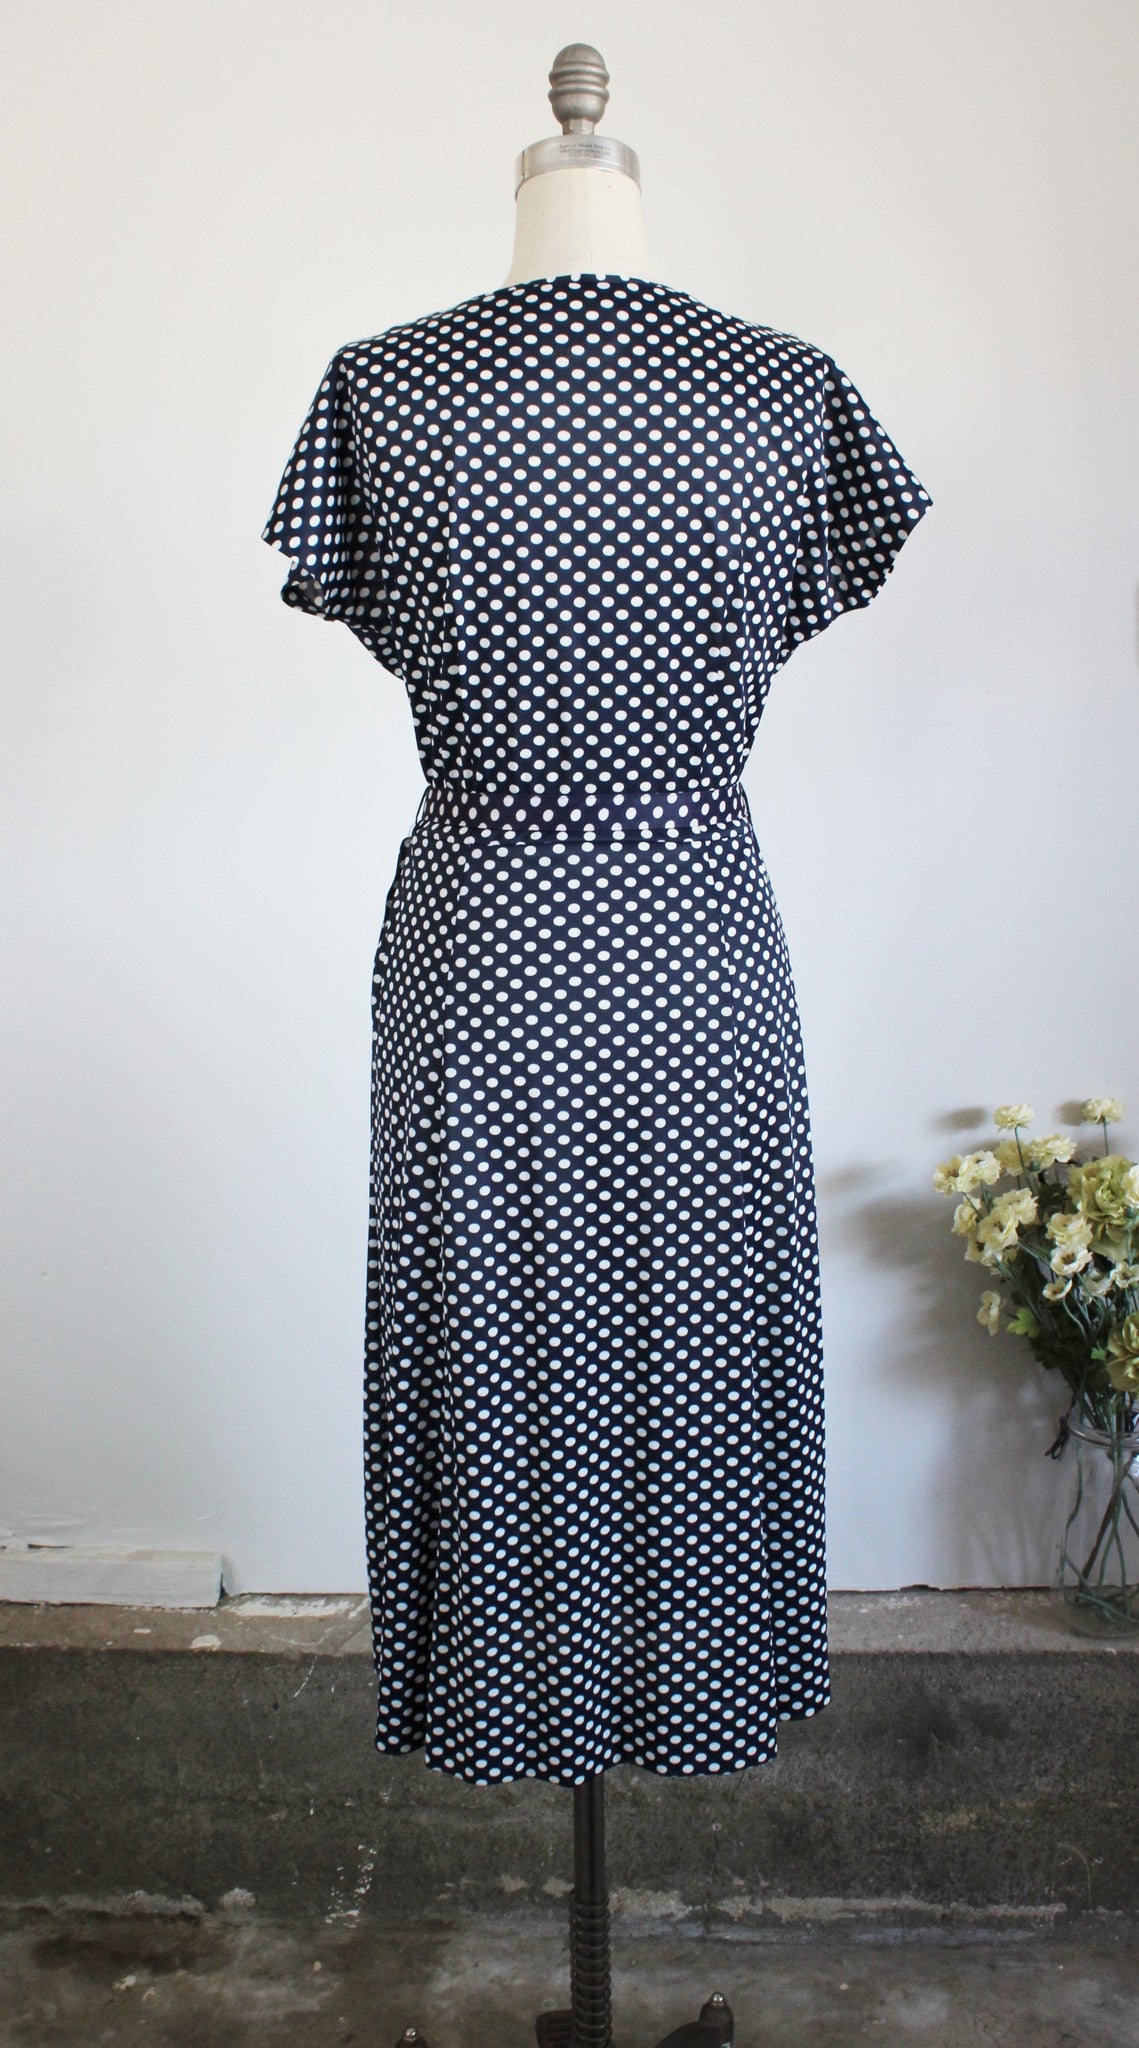 Vintage 1950s Polkadot Dress With Belt / Navy Blue And White Casualmaker by Sy Frankl